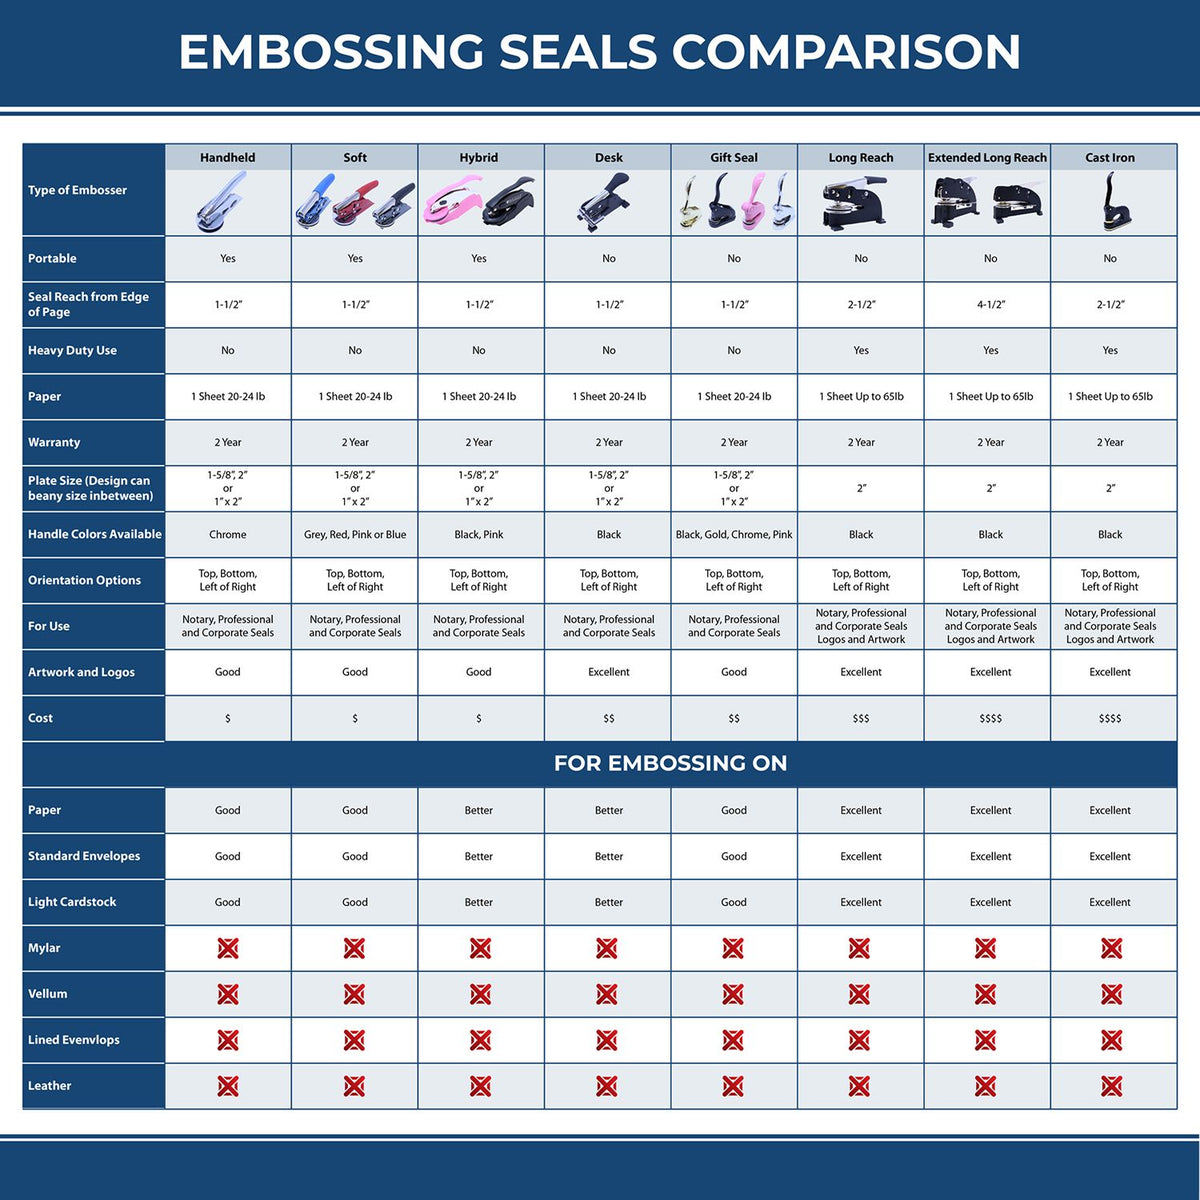 A comparison chart for the different types of mount models available for the State of Georgia Extended Long Reach Geologist Seal